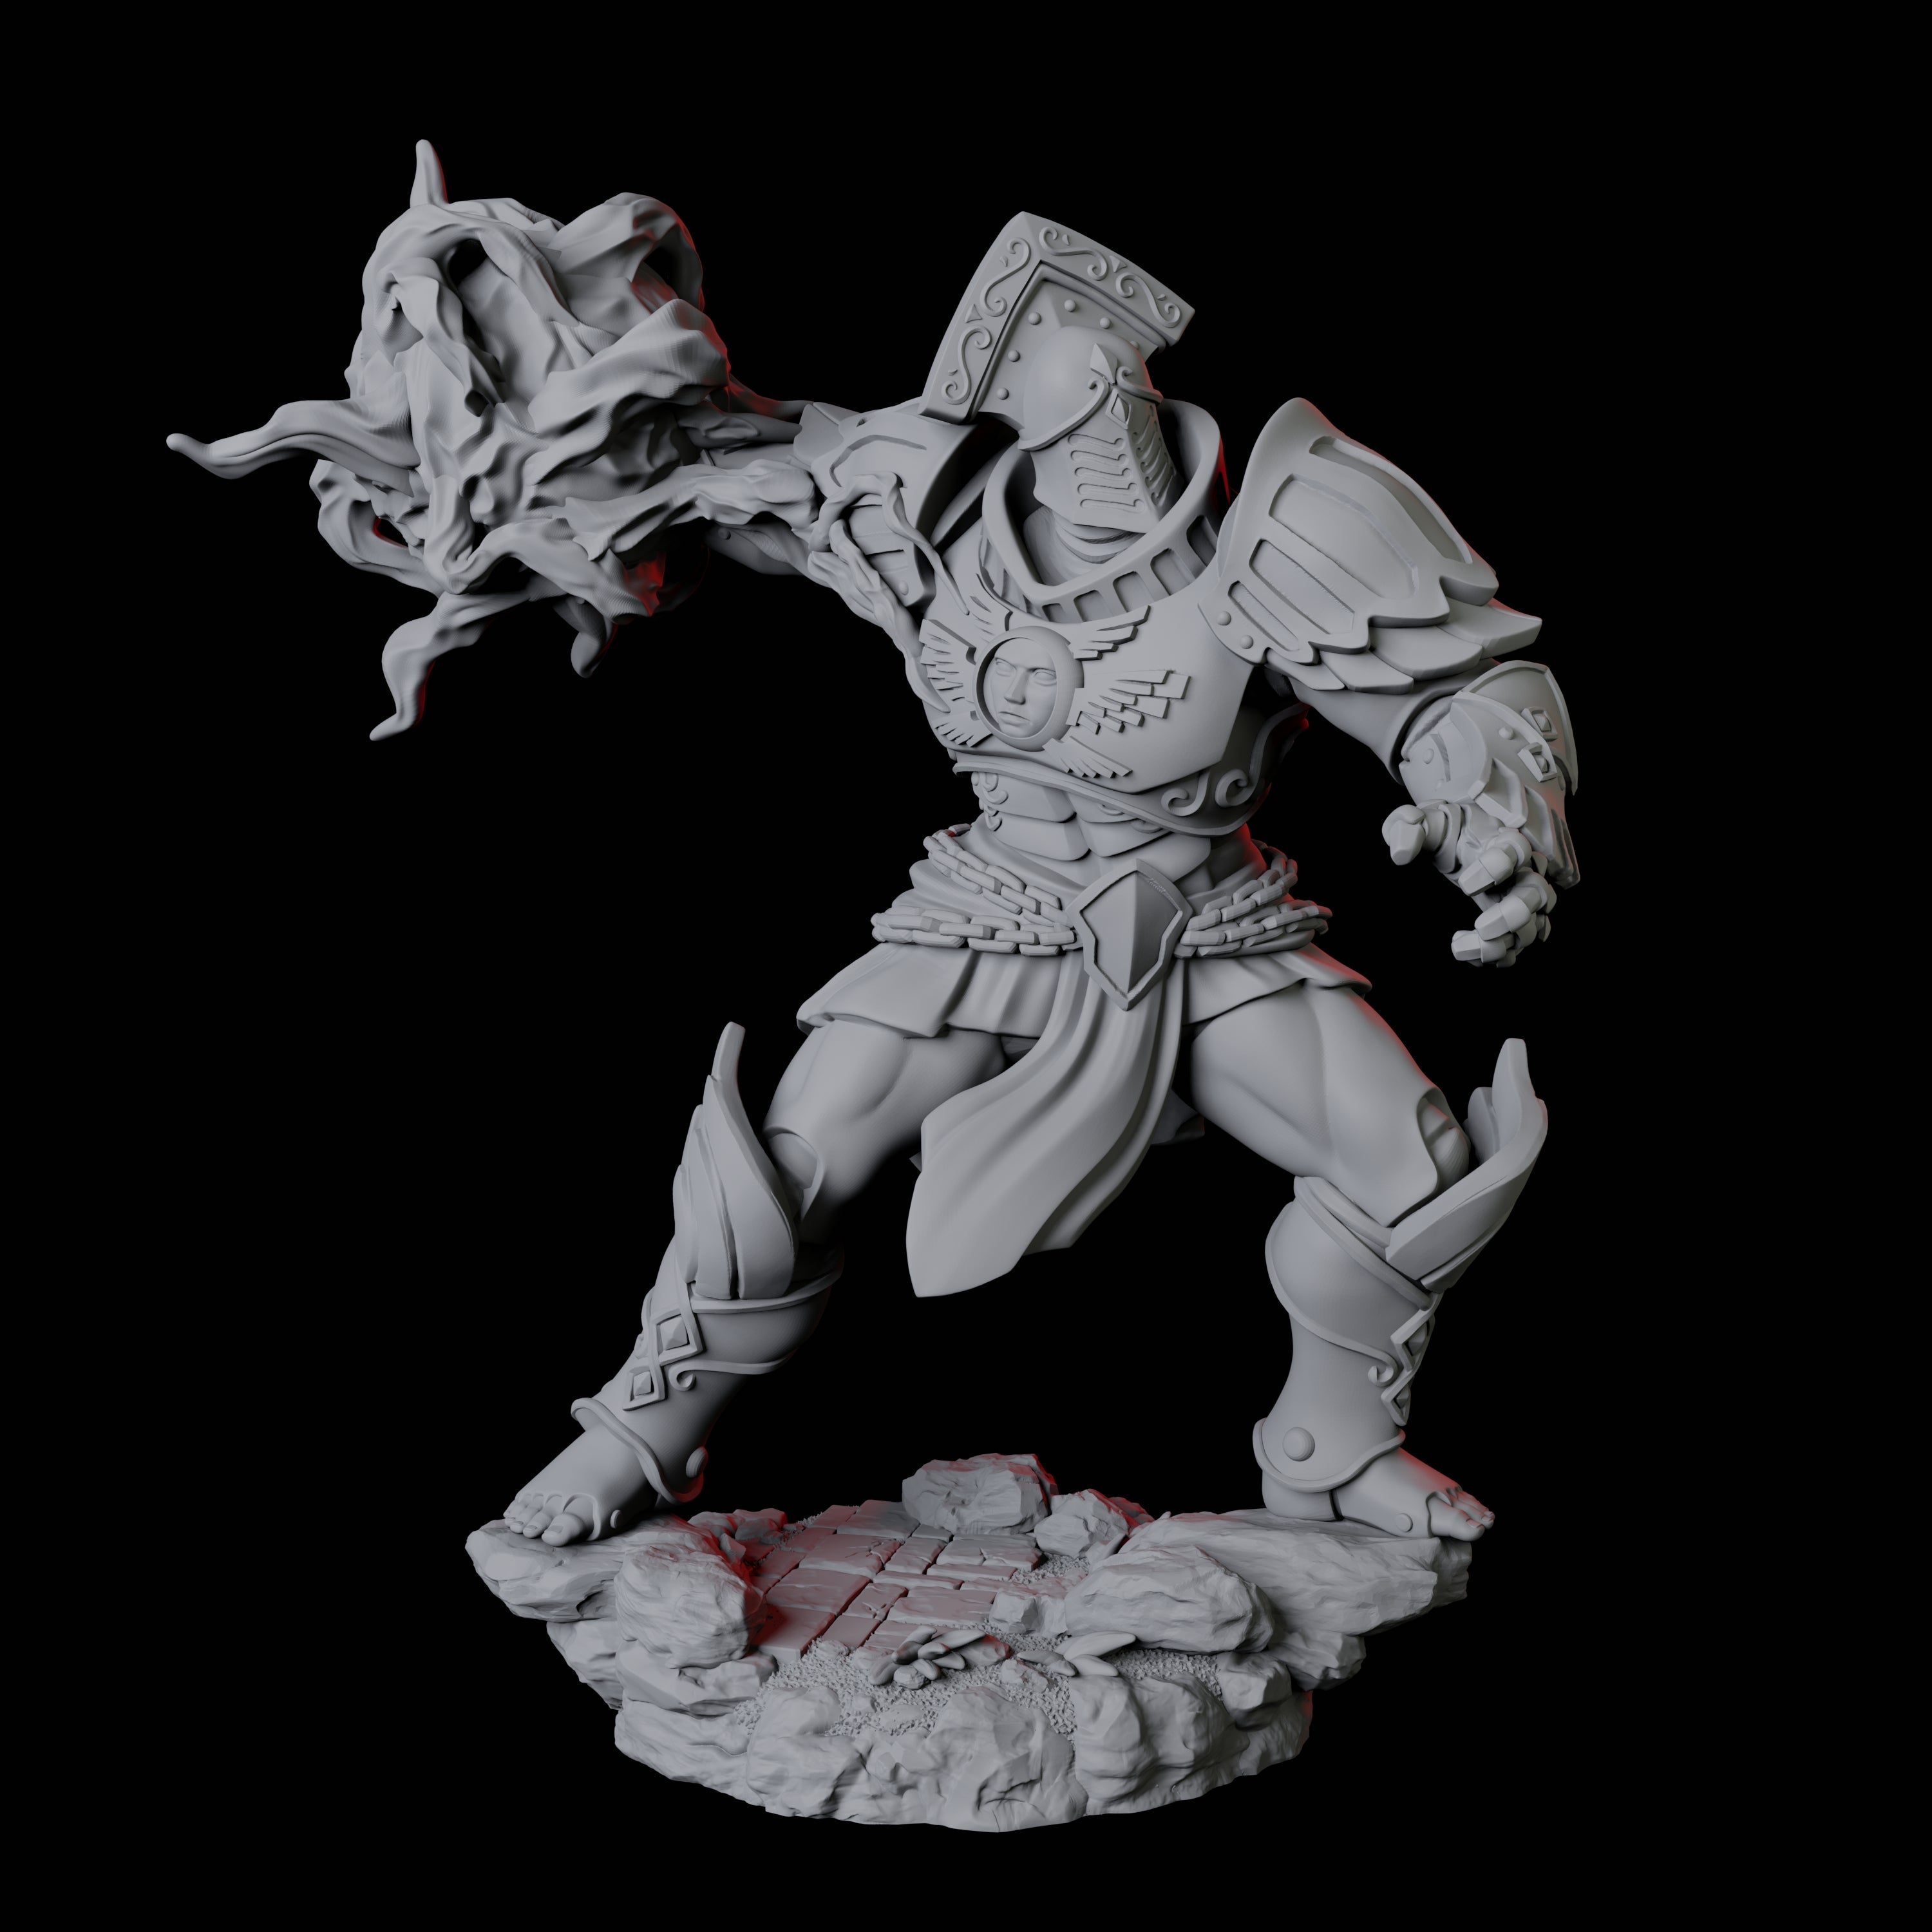 Striking Paladin Miniature for Dungeons and Dragons, Pathfinder or other TTRPGs